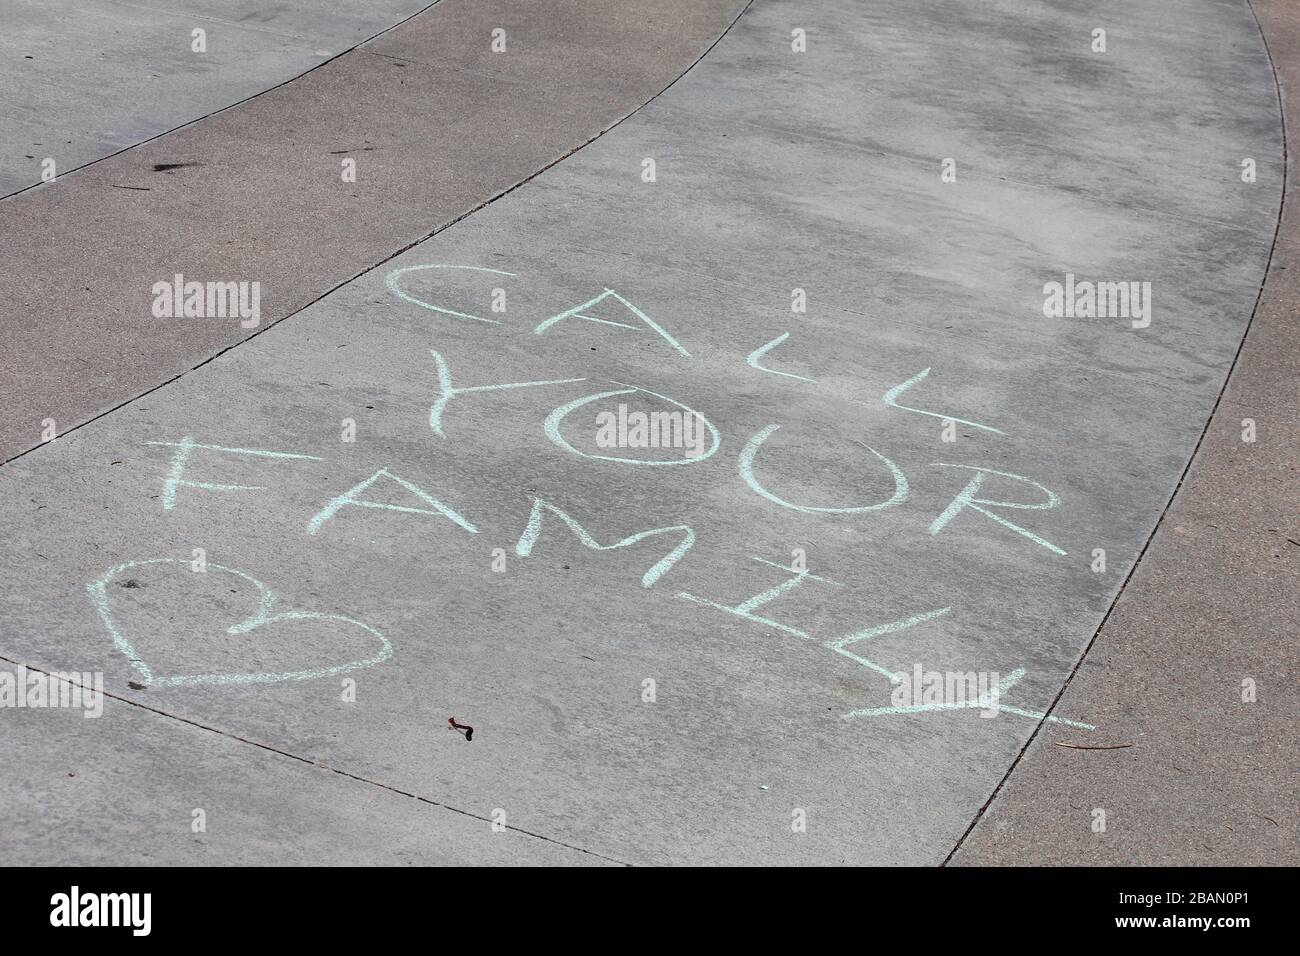 Chalk Writing - Where Are You Now? Stock Photo, Picture and Royalty Free  Image. Image 12907406.